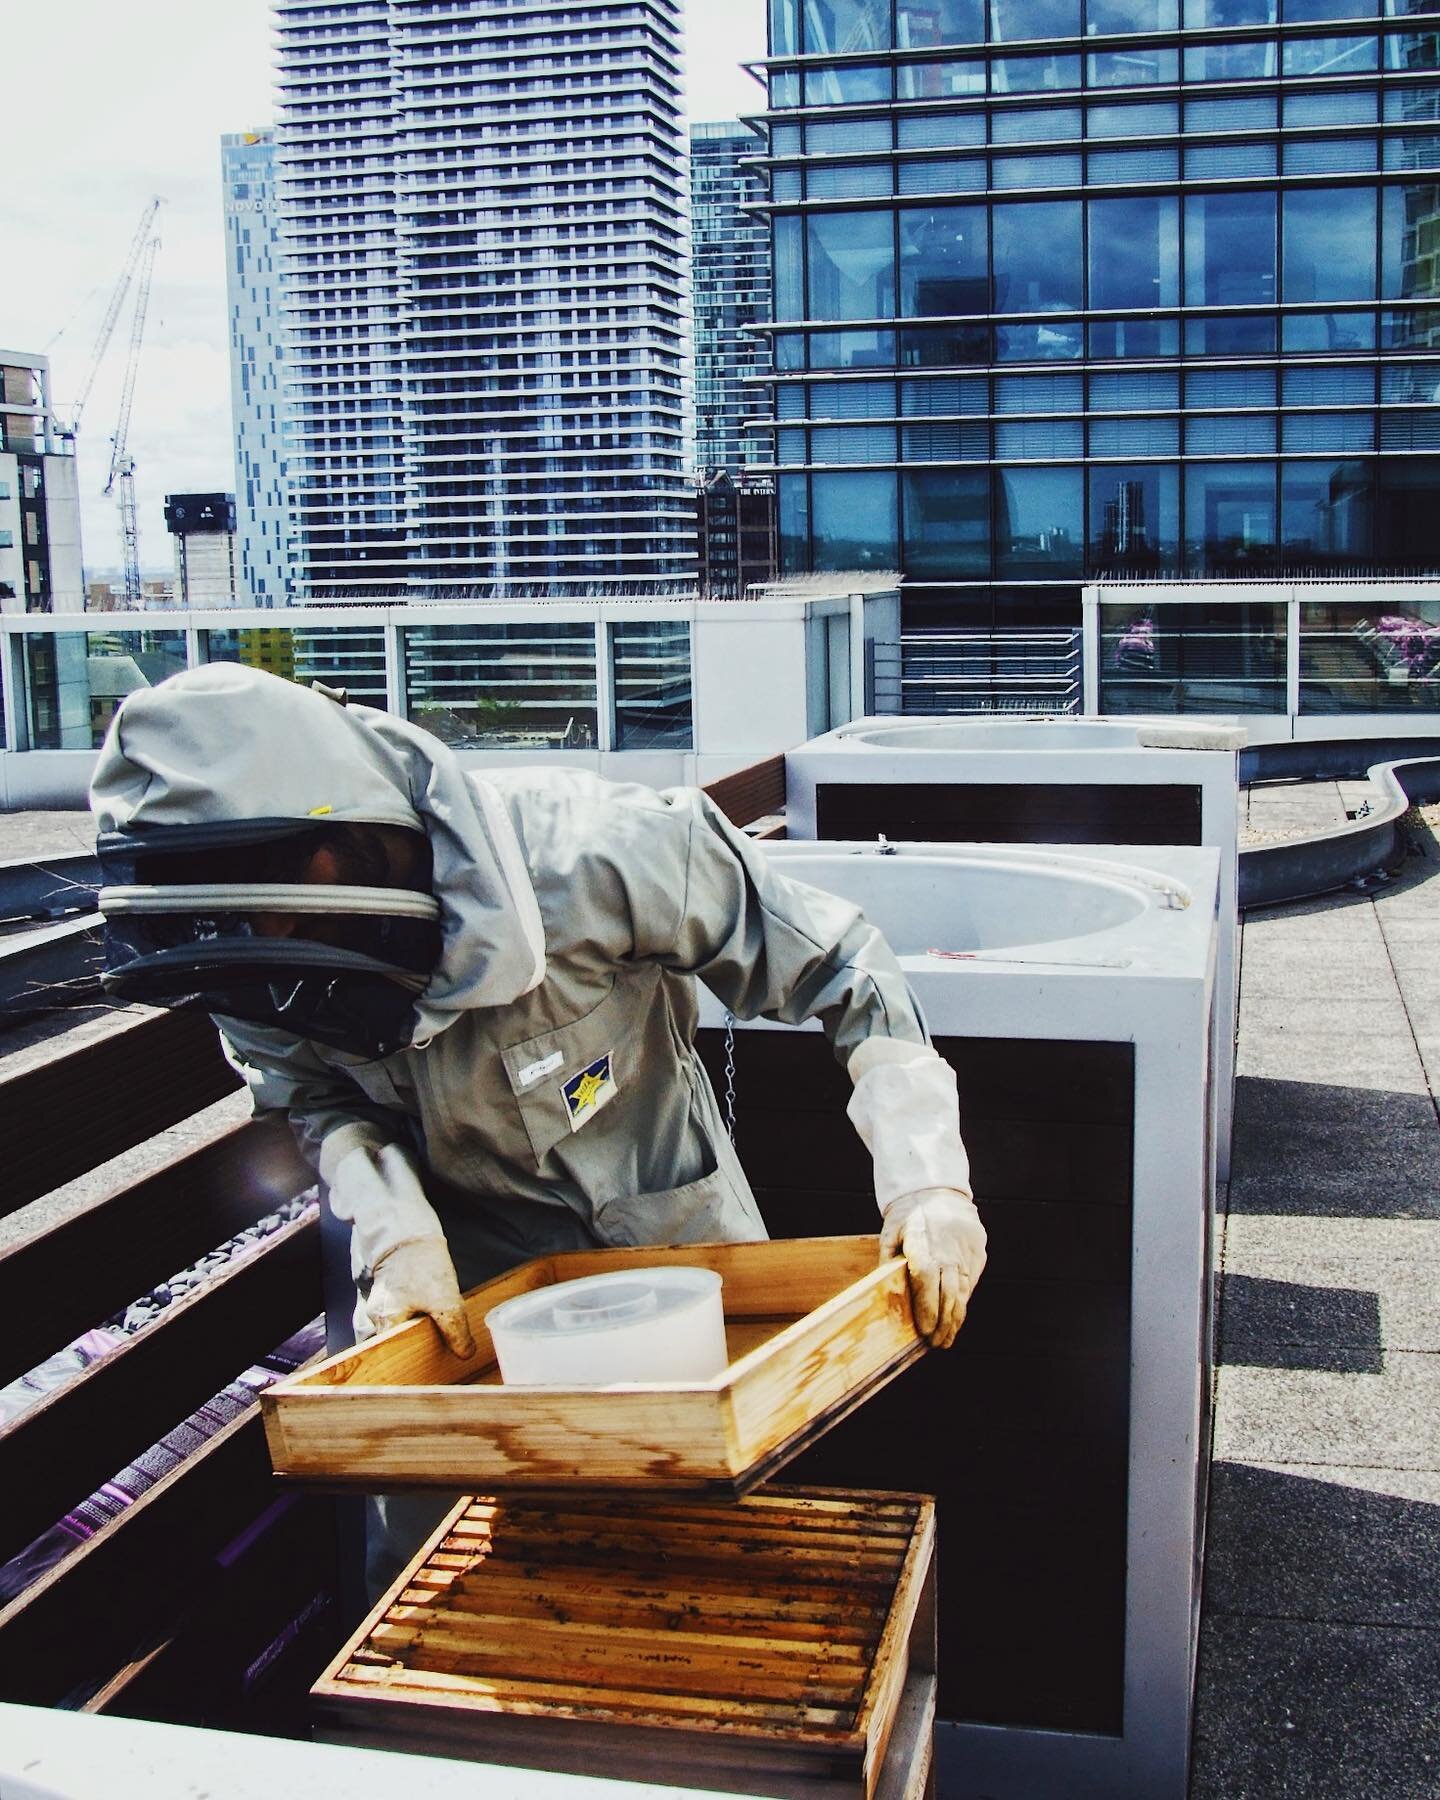 Bees love rooftops! 🐝 Our Canary Wharf bees are thriving &amp; we are so excited for this year&rsquo;s honey harvest 😋